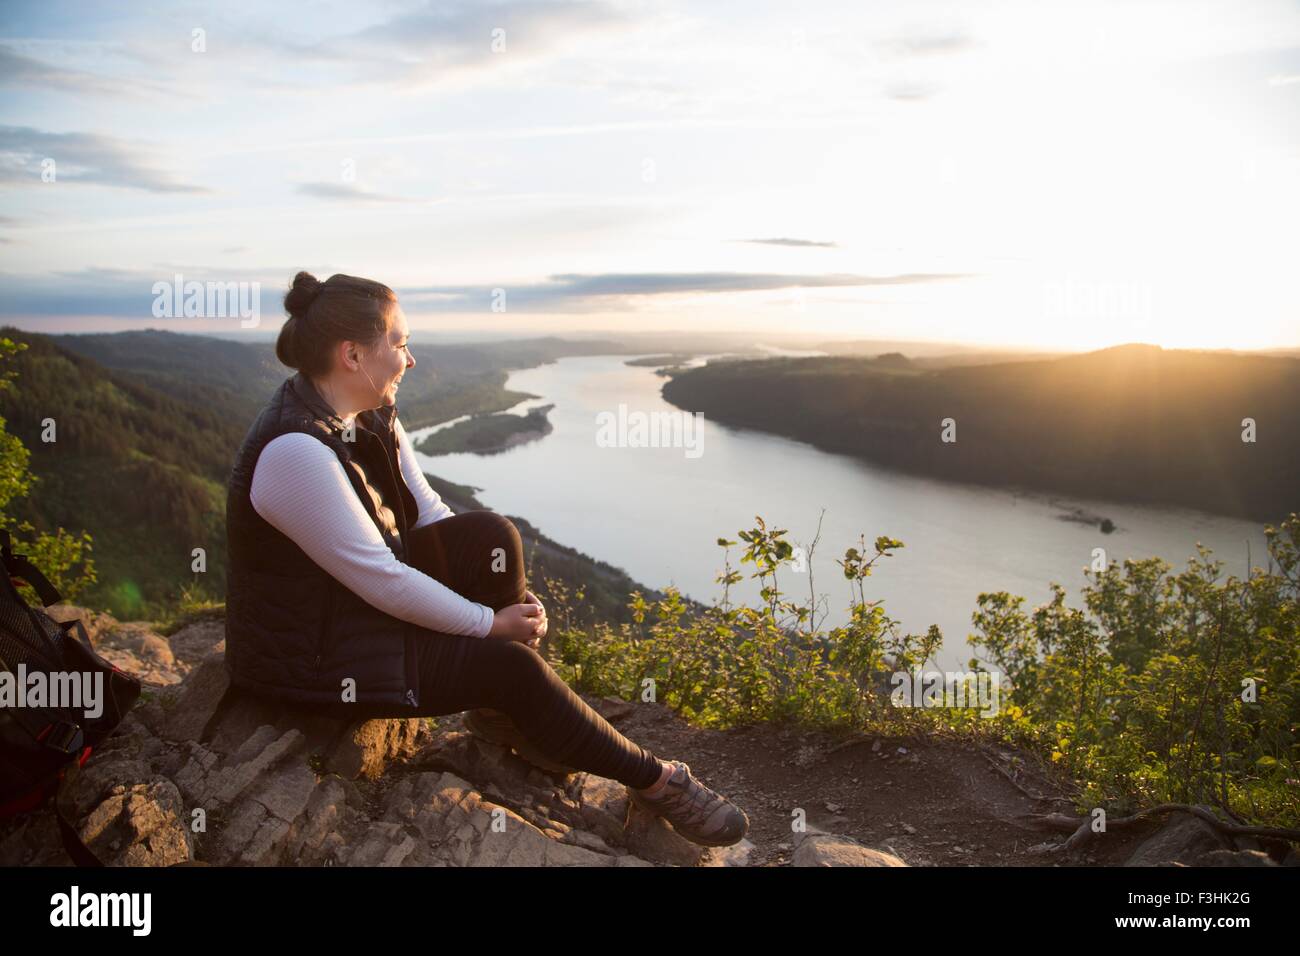 Woman enjoying view on hill, Angel's Rest, Columbia River Gorge, Oregon, USA Stock Photo